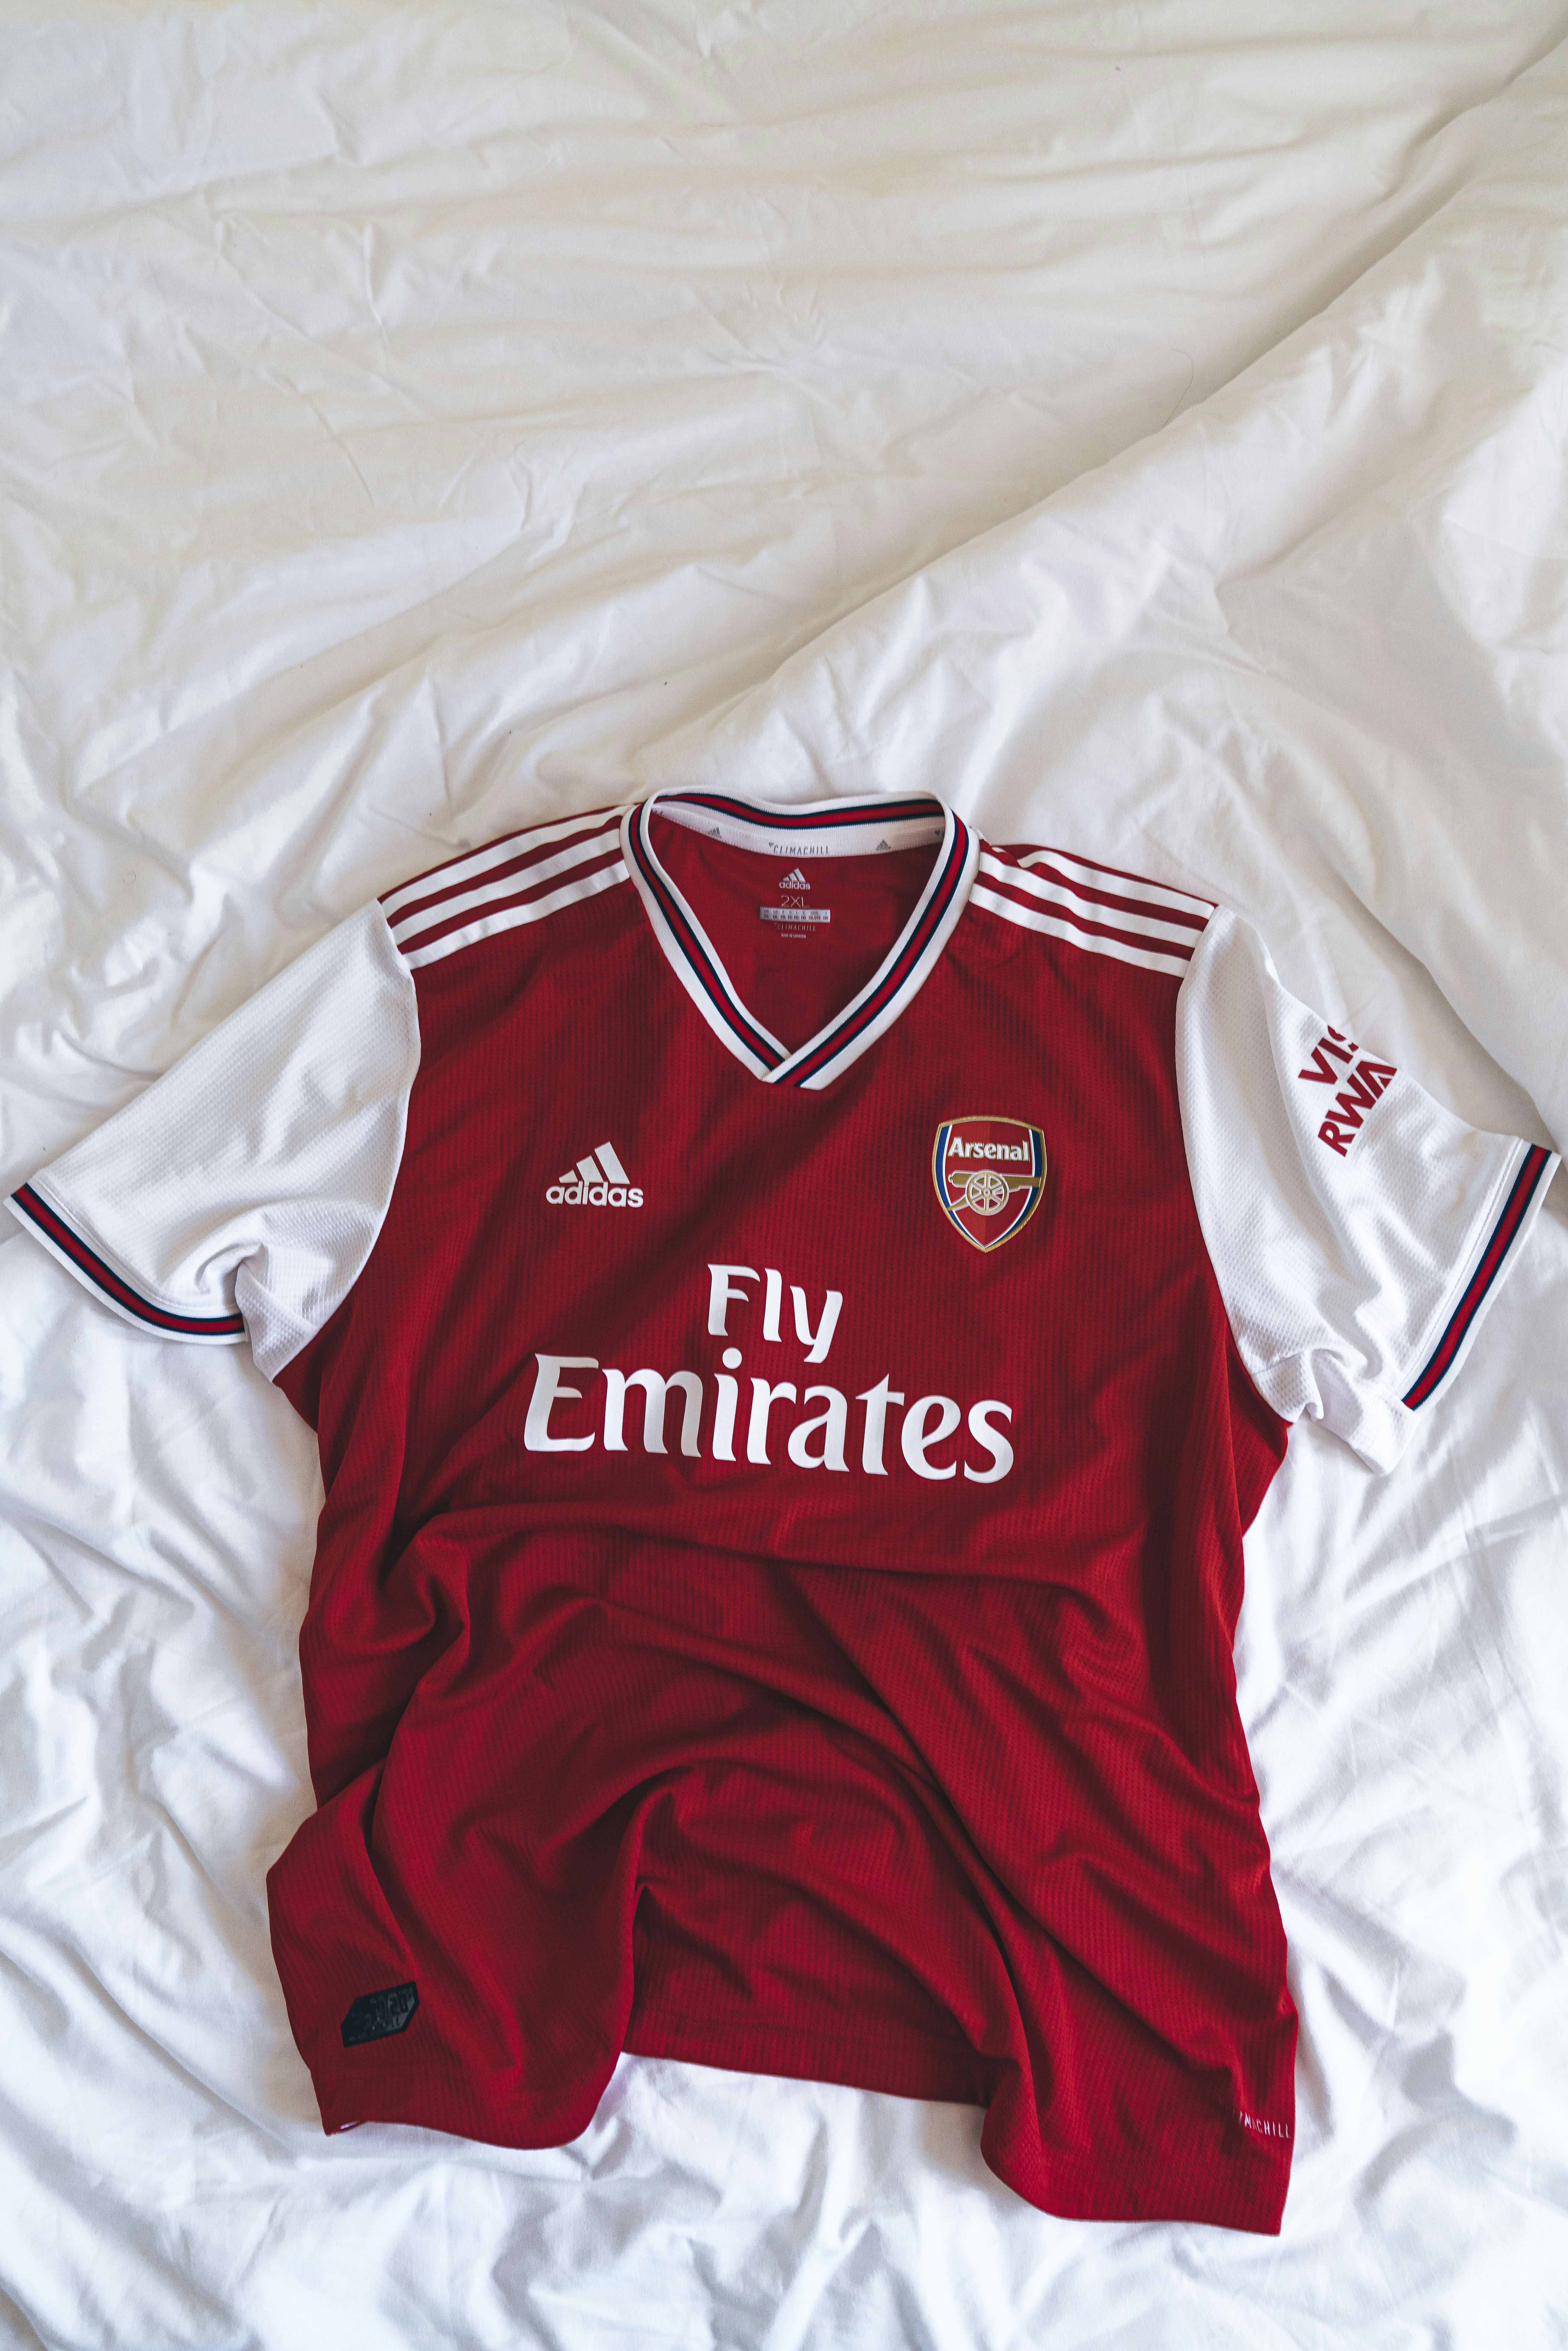 fly emirates jersey black and red